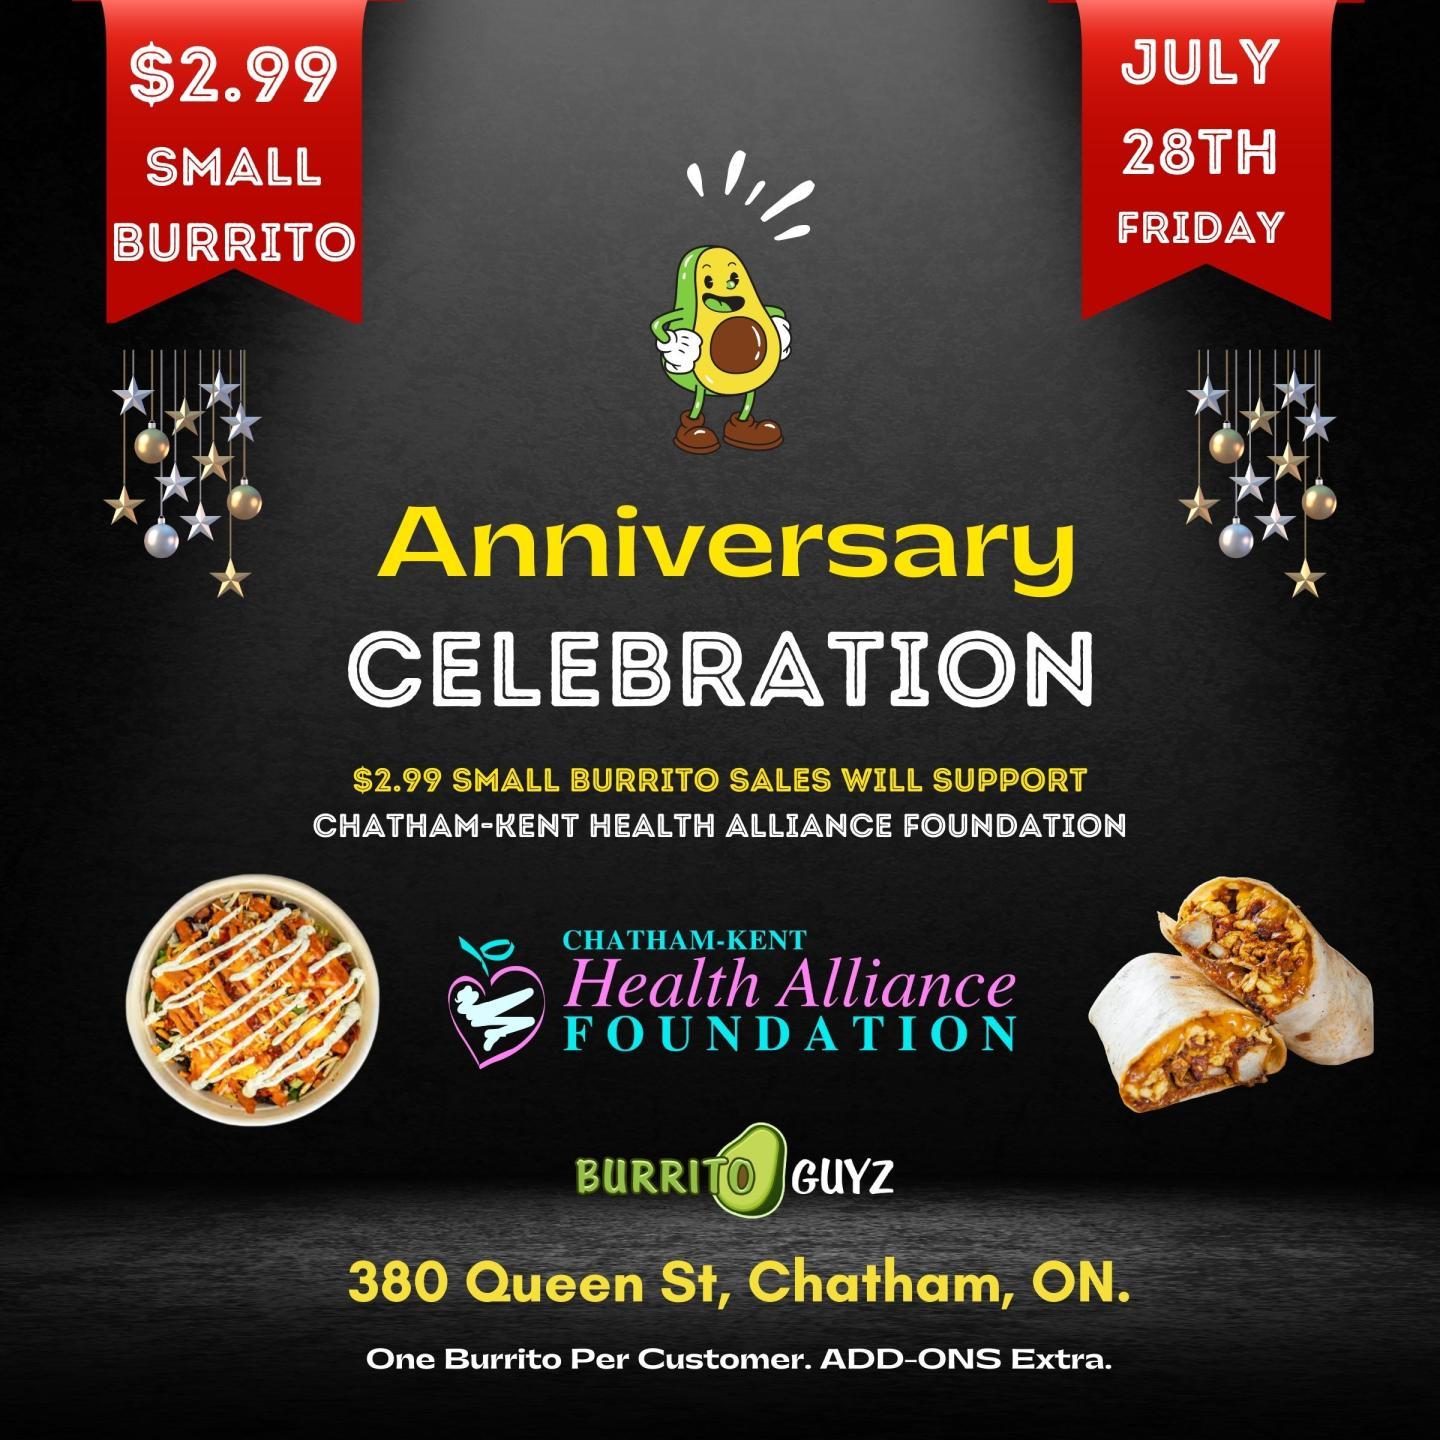 Burrito Guyz Chatham 1st Anniversary Celebration fundraiser in support of the CKHA Foundation and the Highest Priority Needs at Chatham-Kent Health Alliance